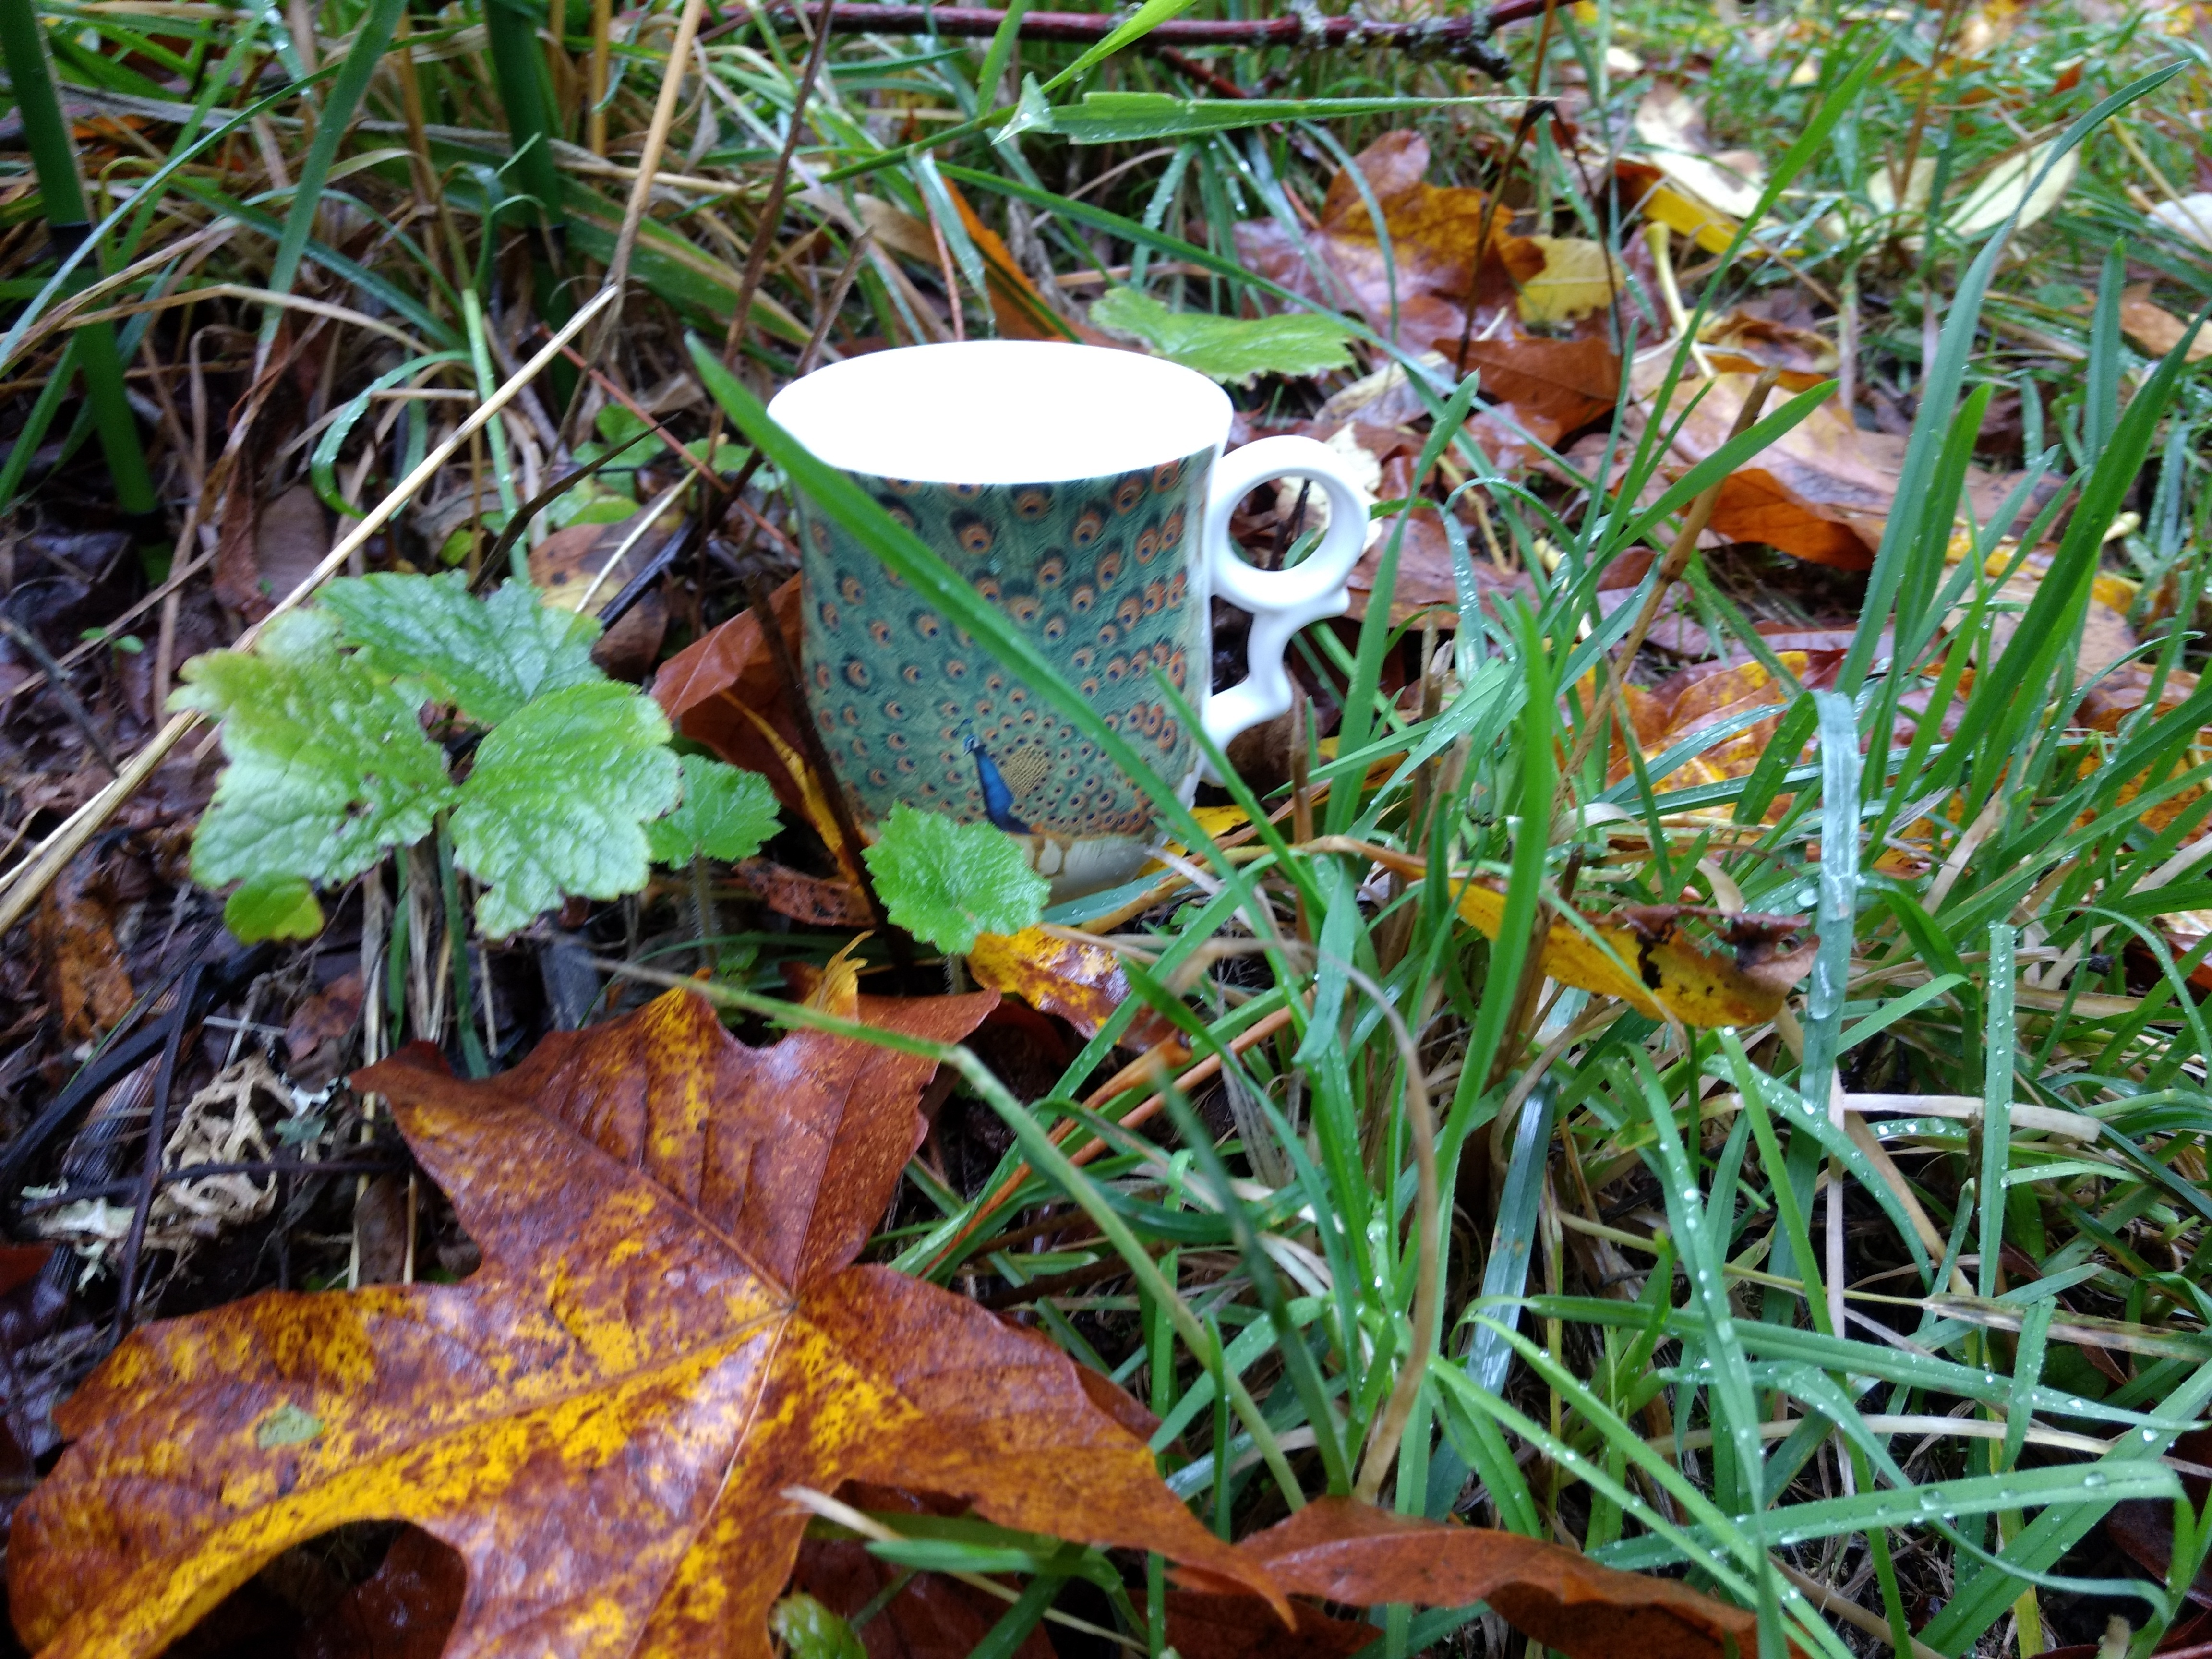 A coffee mug rests on the ground near grass by some fallen leaves.